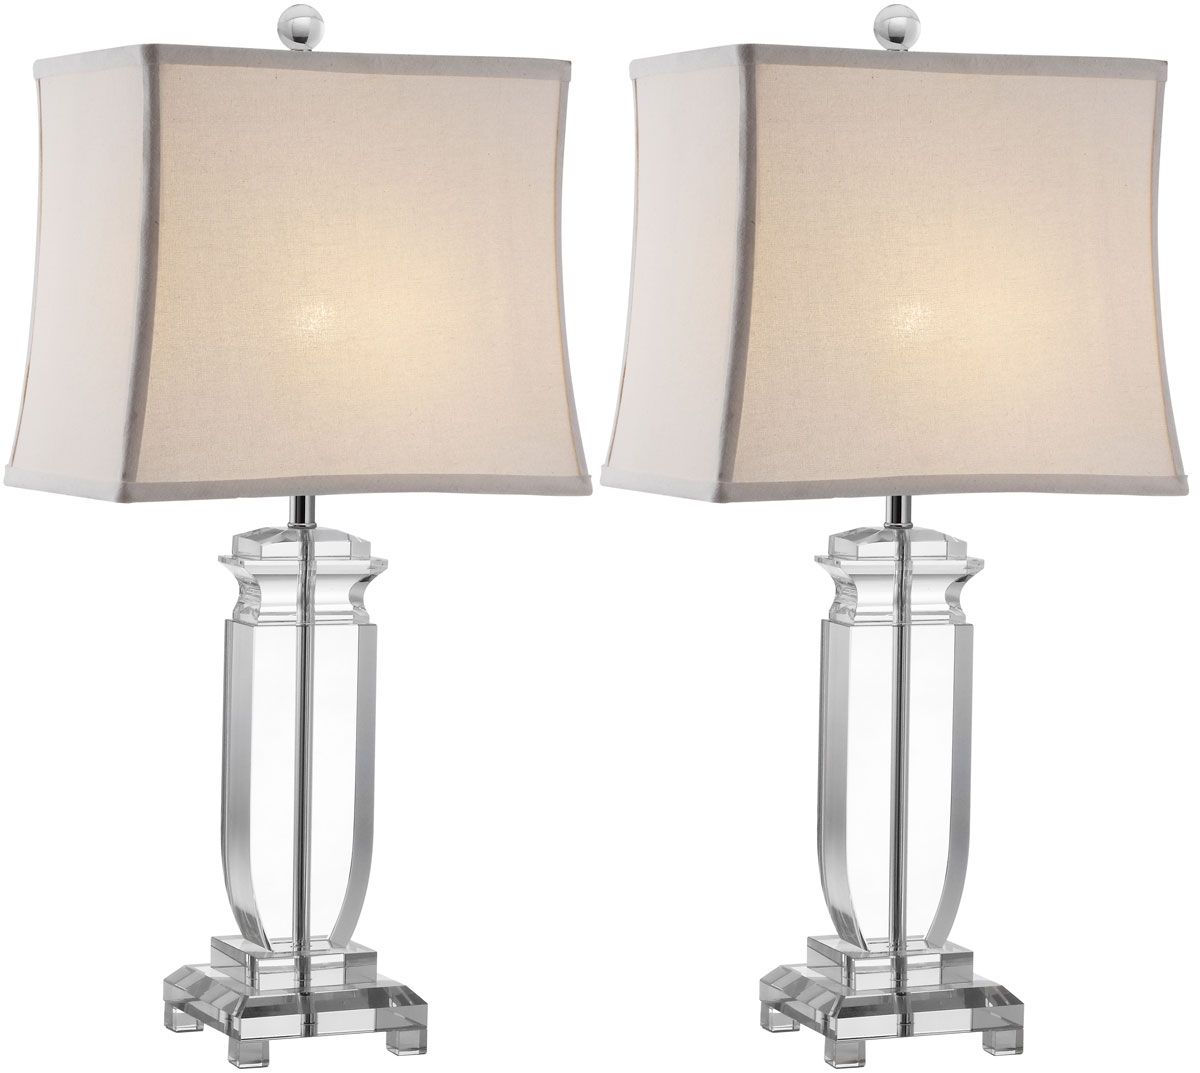 Olympia 24-Inch H Crystal Table Lamp - Clear - Arlo Home - Image 1